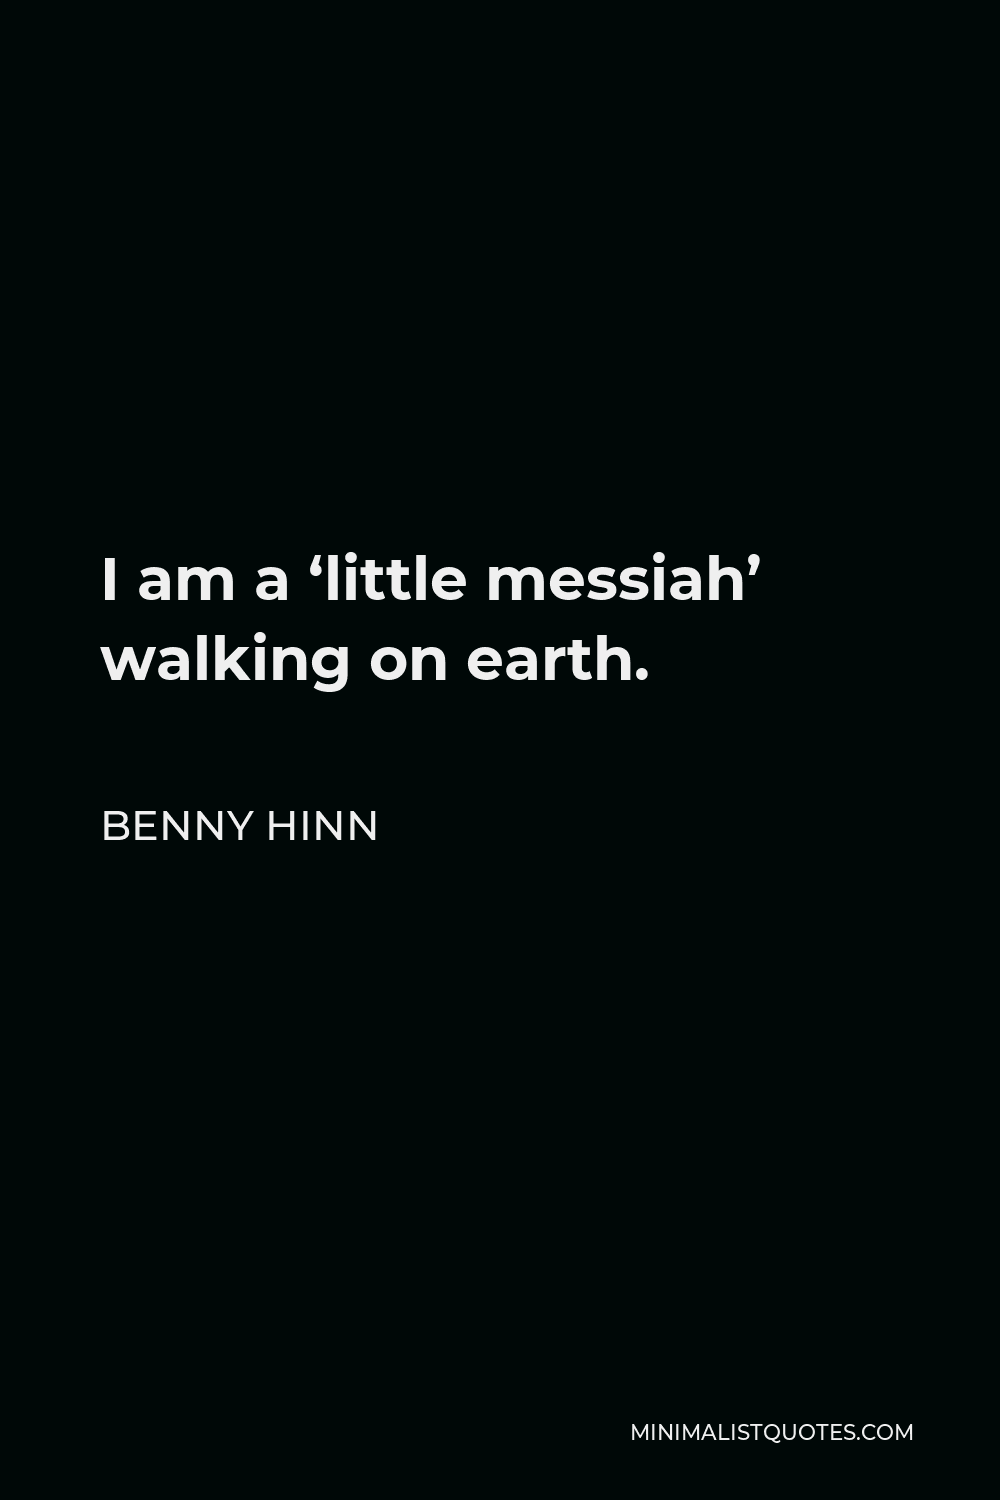 Benny Hinn Quote - I am a ‘little messiah’ walking on earth.